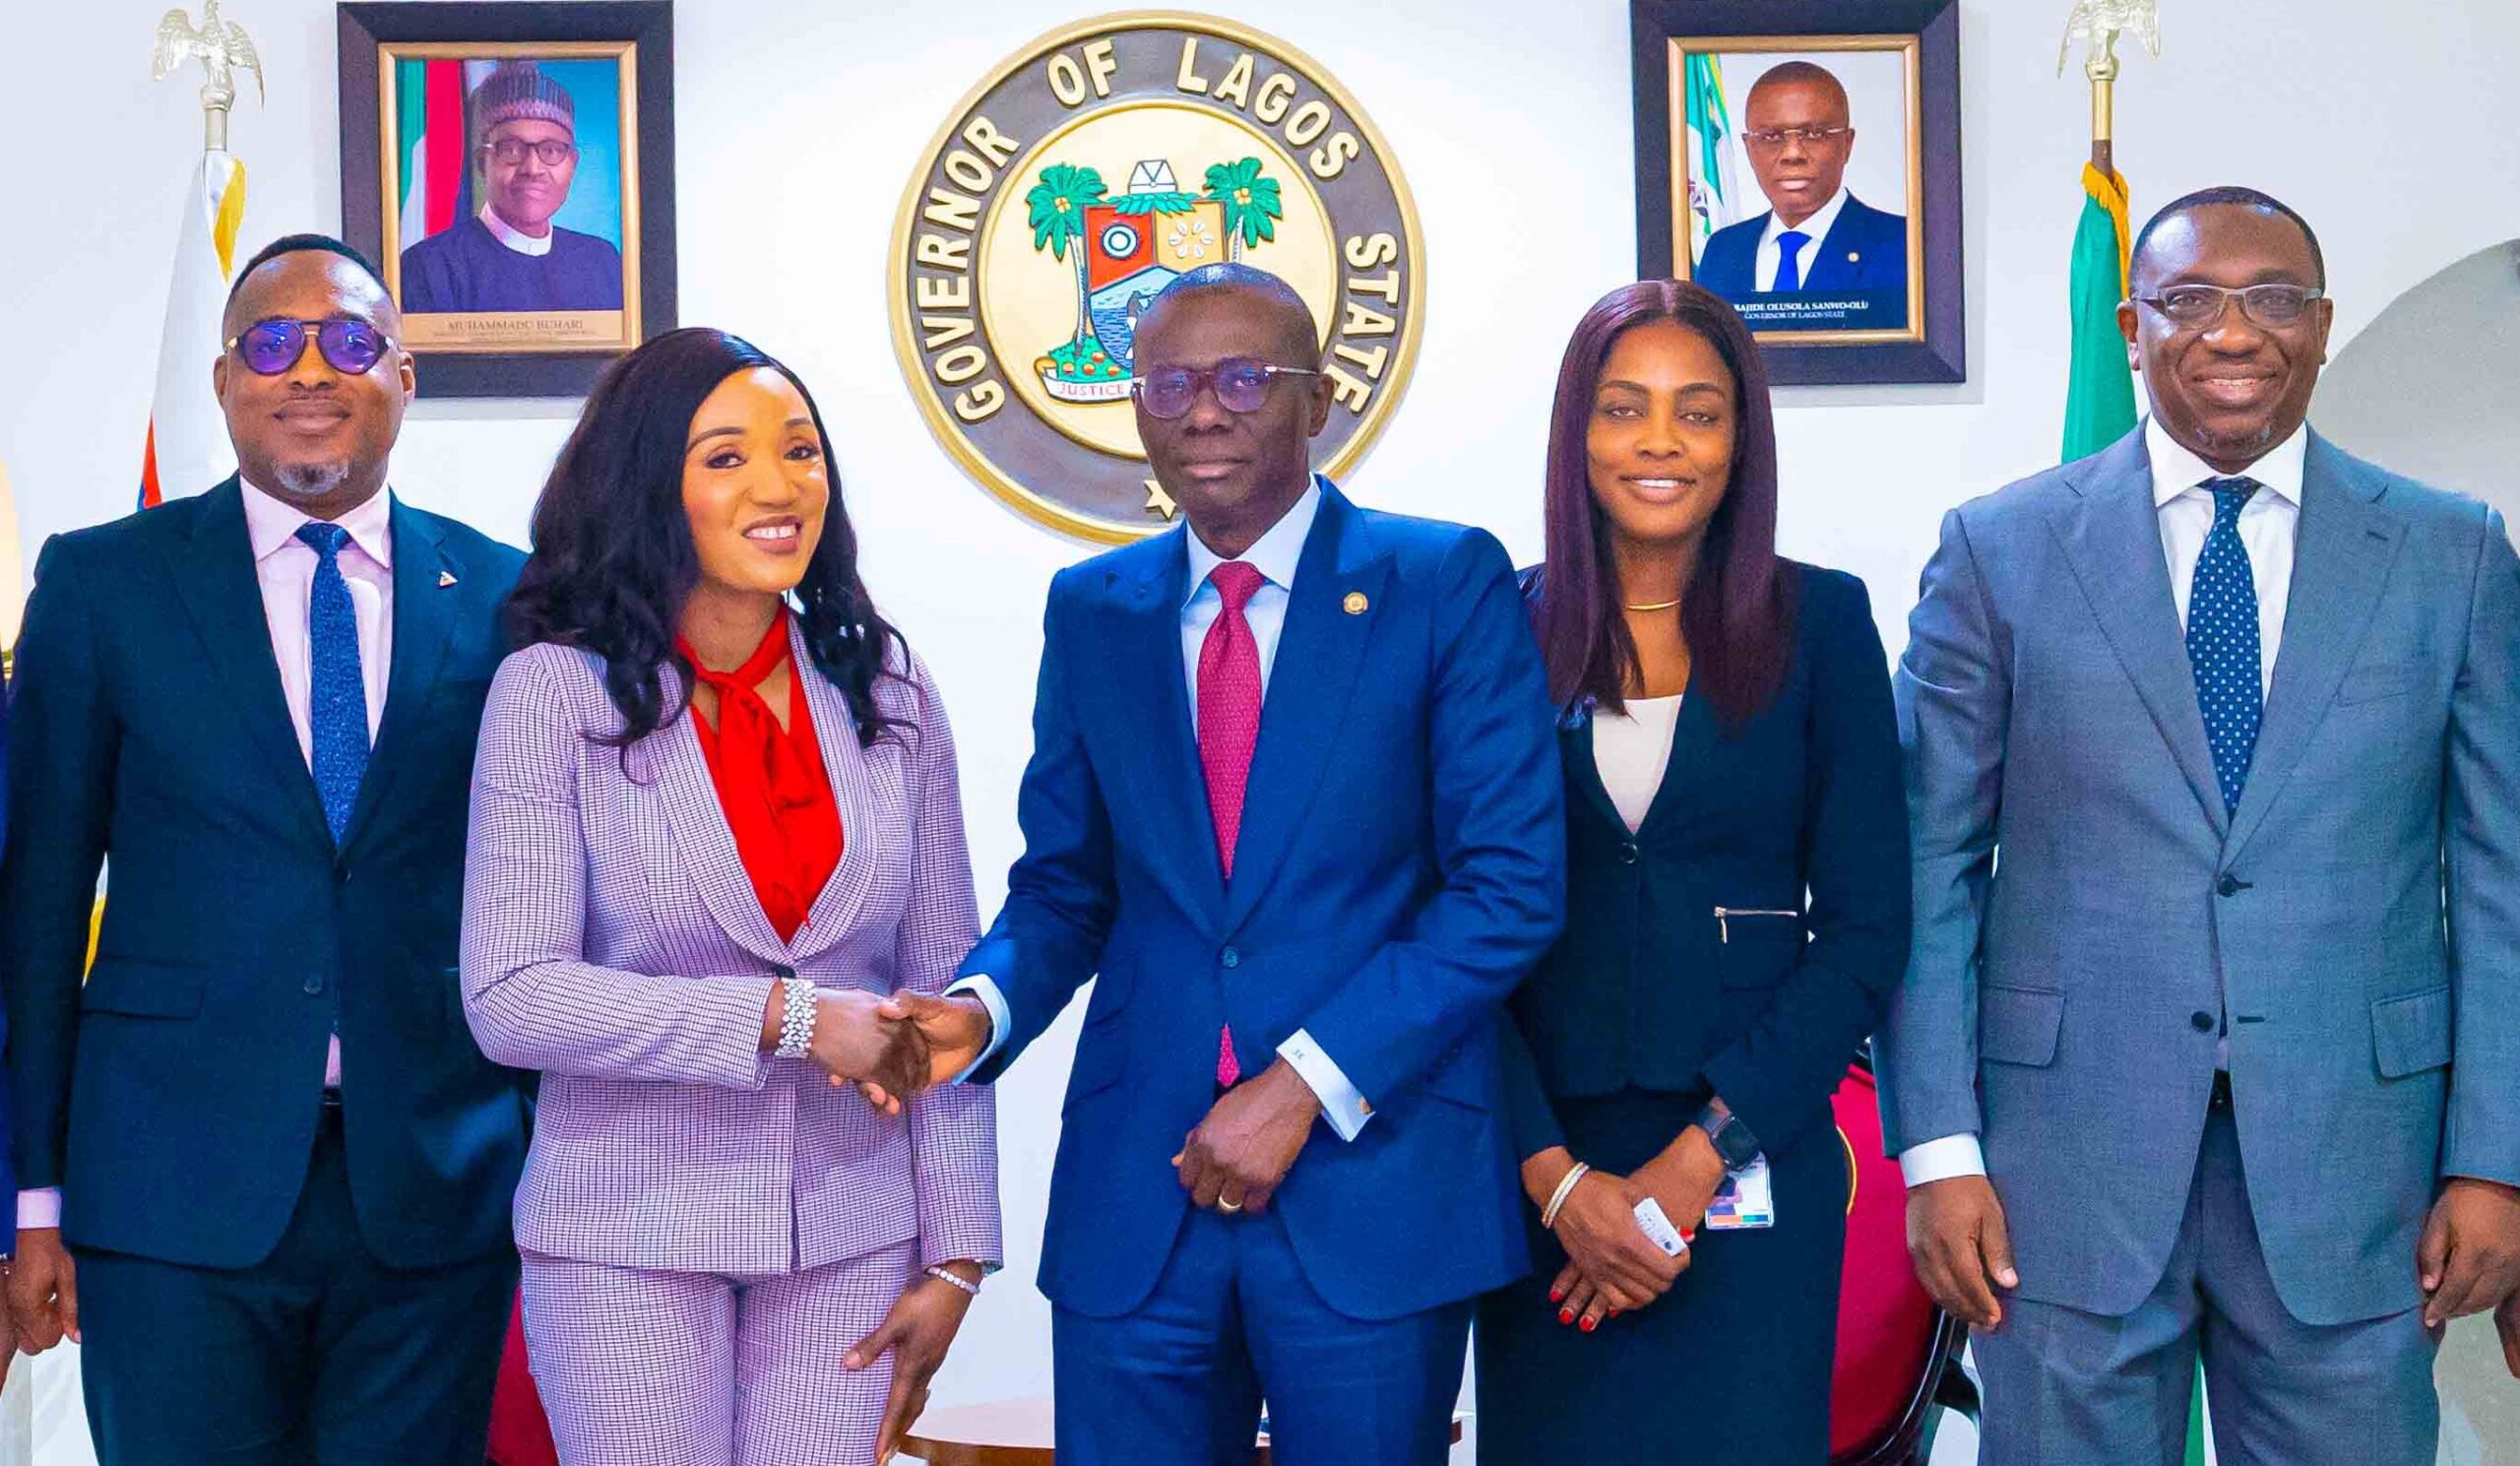 Photos: Management Of Titan Trust Bank Limited Pays Courtesy Visit To Governor Sanwo-Olu At Lagos House, Marina